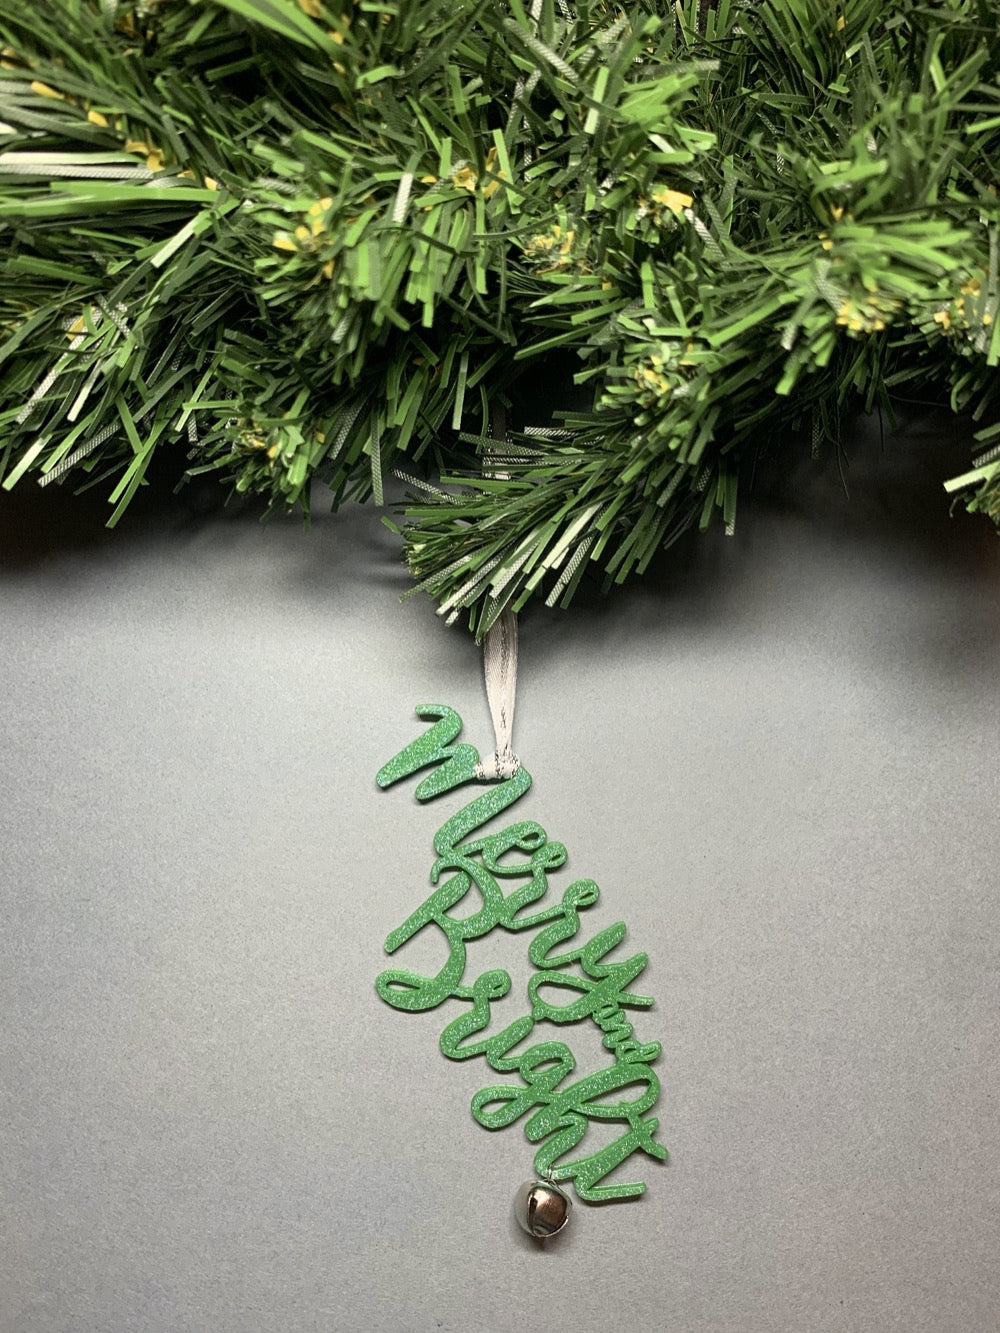 On a grey background and hanging from a green wreath is a 3D printed R+D ornament. It is a cursive text with a jingle bell and covered in glitter to make it shimmer and shine in the light. This ornament reads, Merry and Bright.